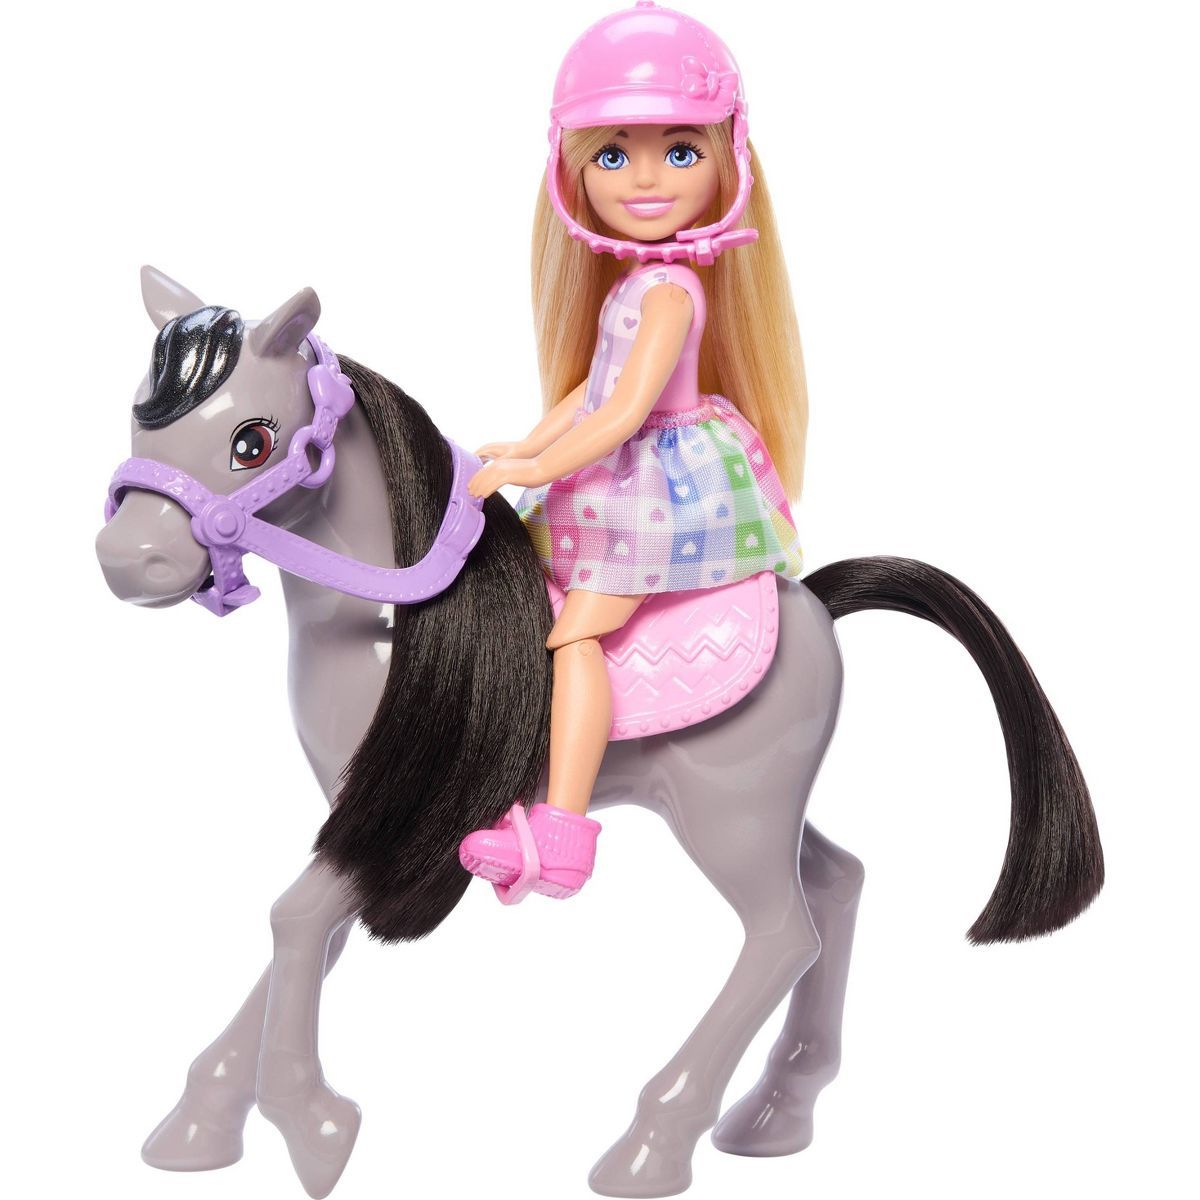 Barbie Chelsea Doll & Horse Toy Set, Includes Helmet Accessory, Doll Bends at Knees to "Ride" Pon... | Target